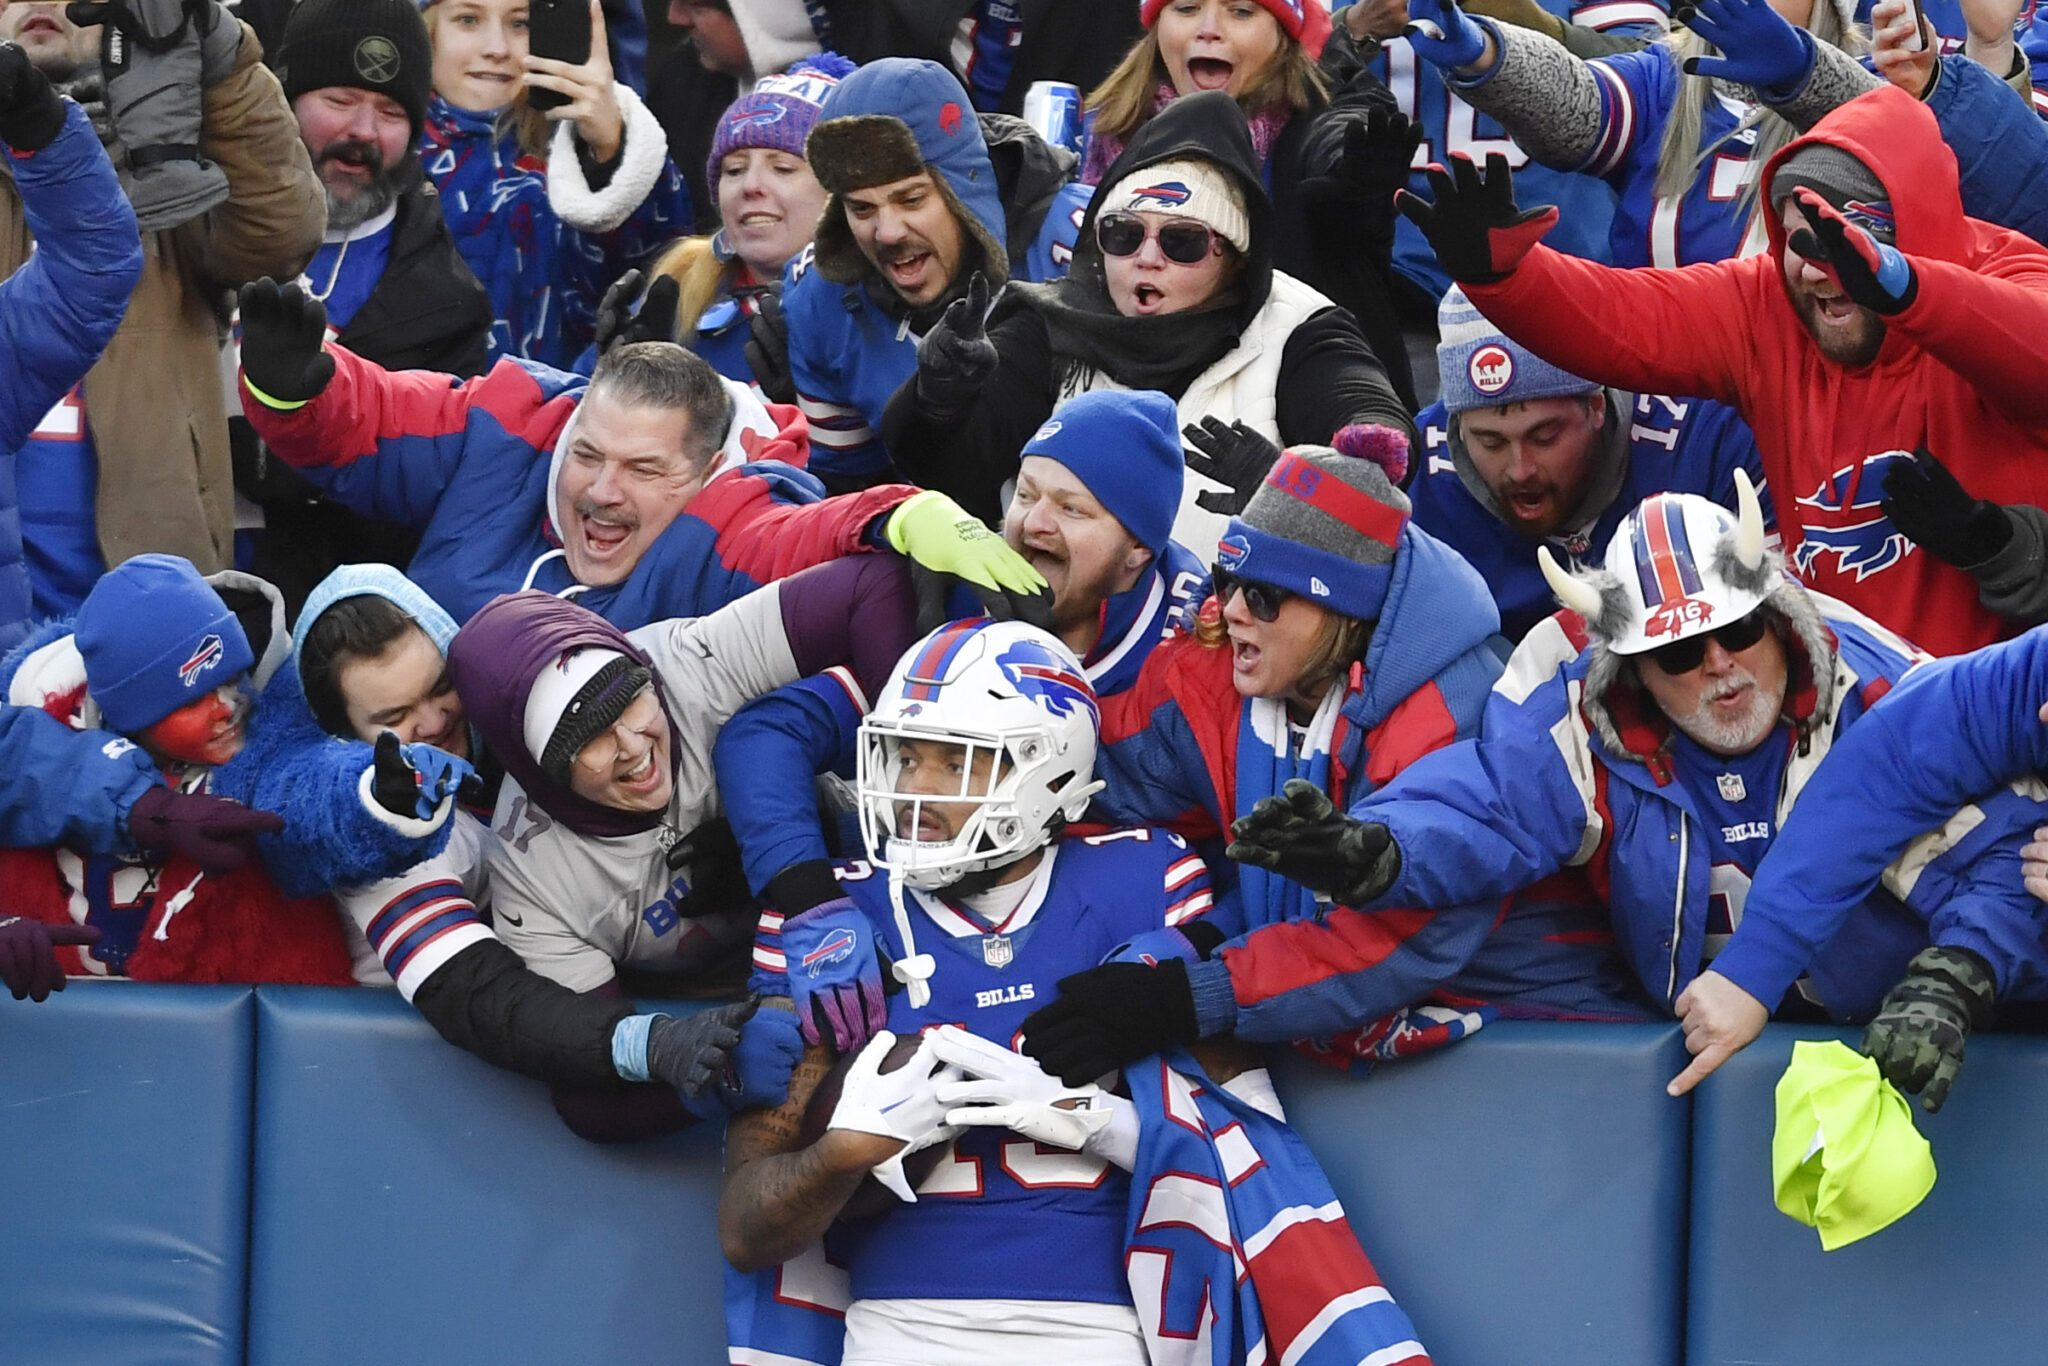 Buffalo Bills wide receiver Gabe Davis (13) is congratulated by fans after his touchdown during the second half of an NFL wild-card playoff football game against the Miami Dolphins, Sunday, Jan. 15, 2023, in Orchard Park, N.Y. (AP Photo/Adrian Kraus)